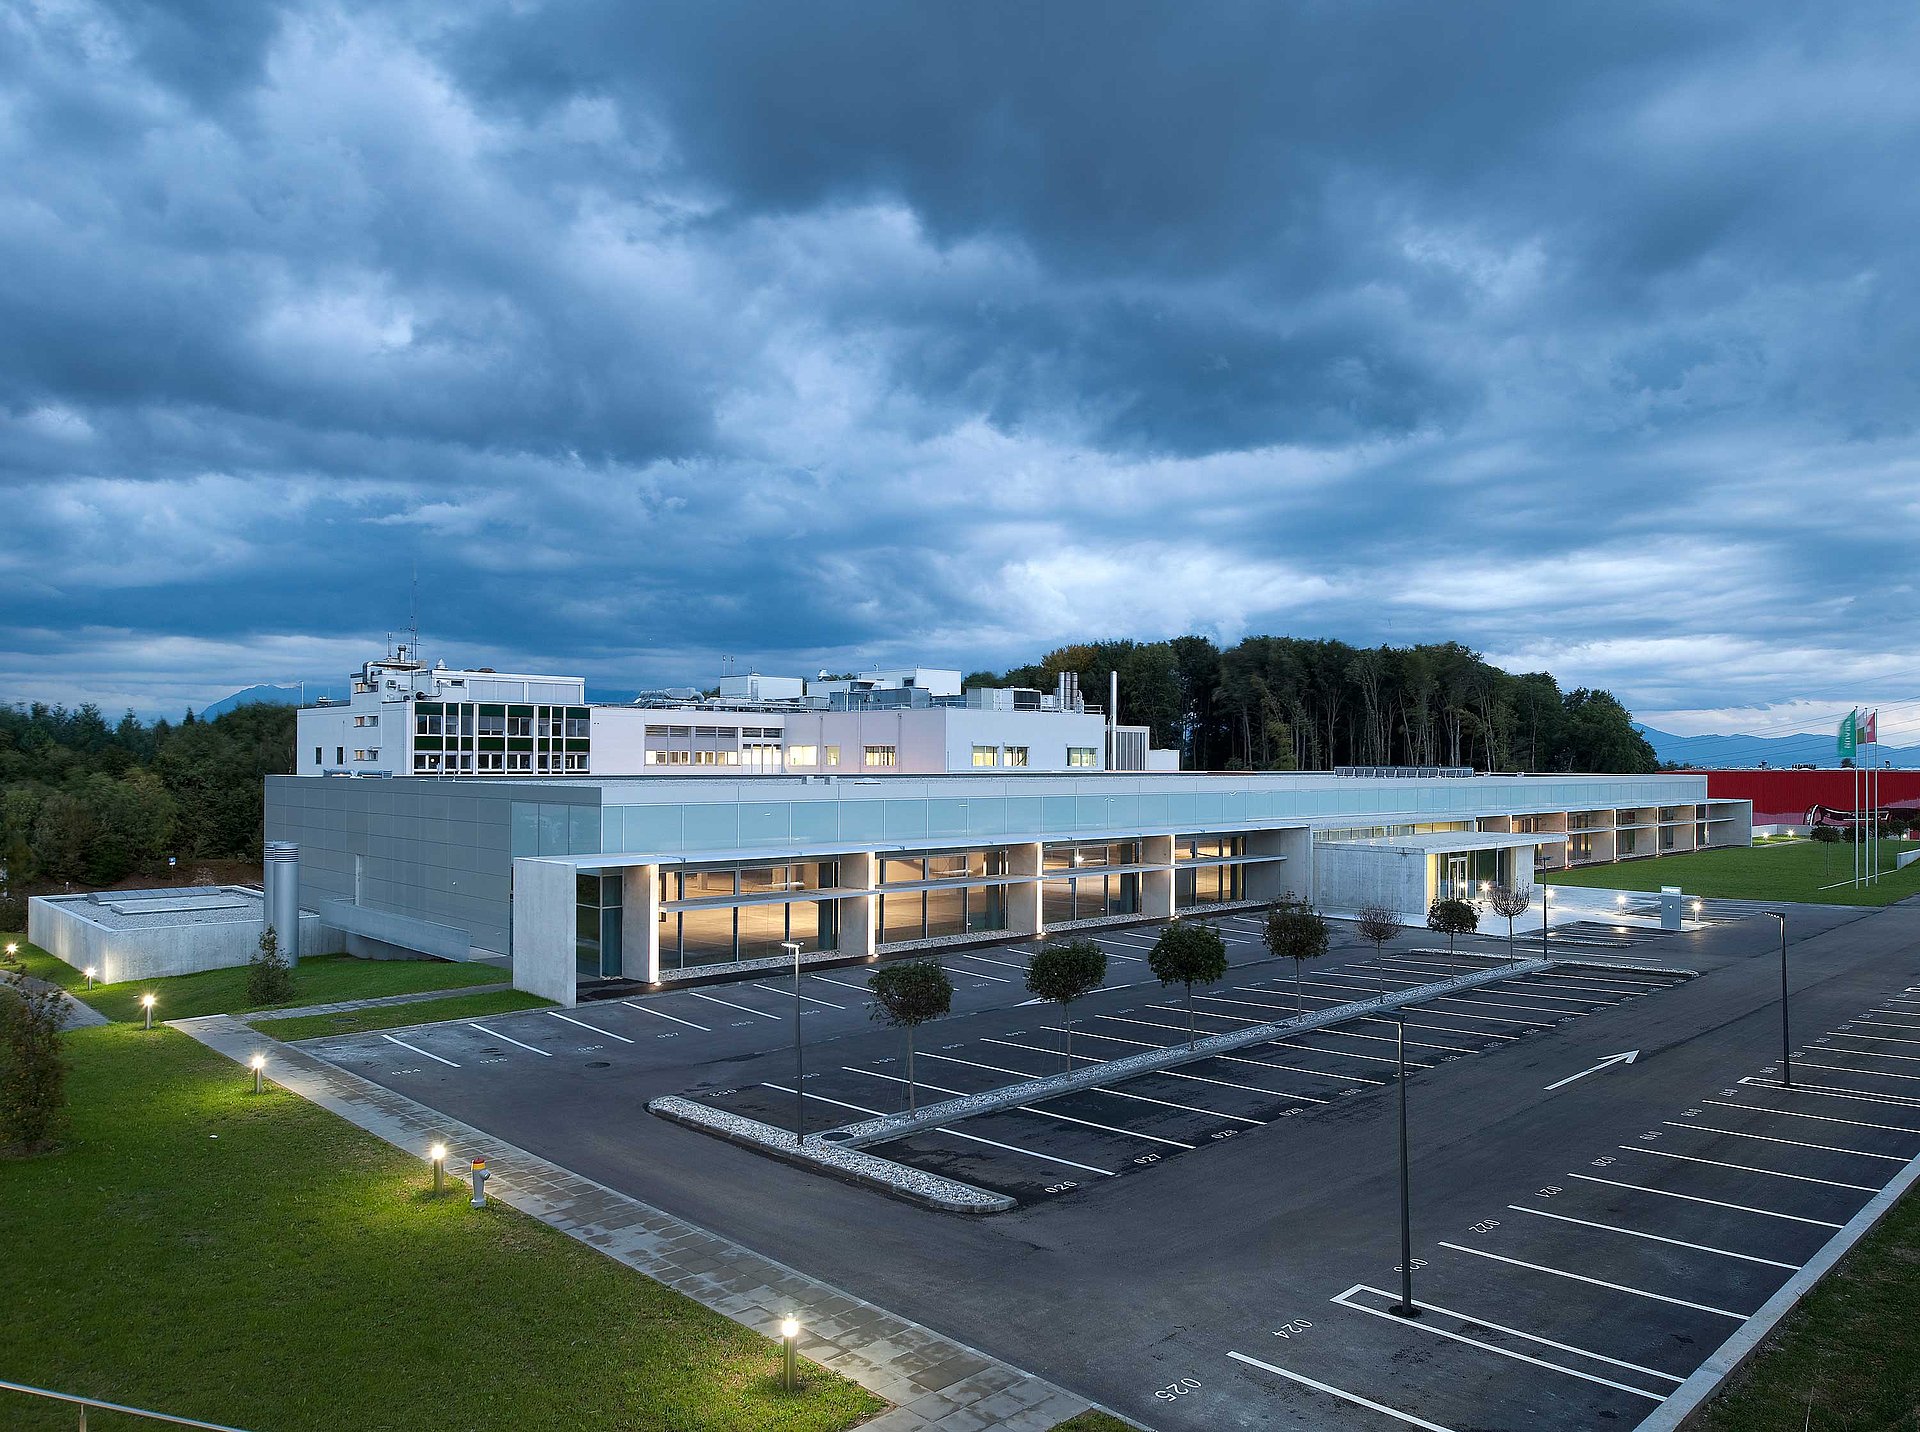 Illuminated manufacturing plant with parking lot in Crissier